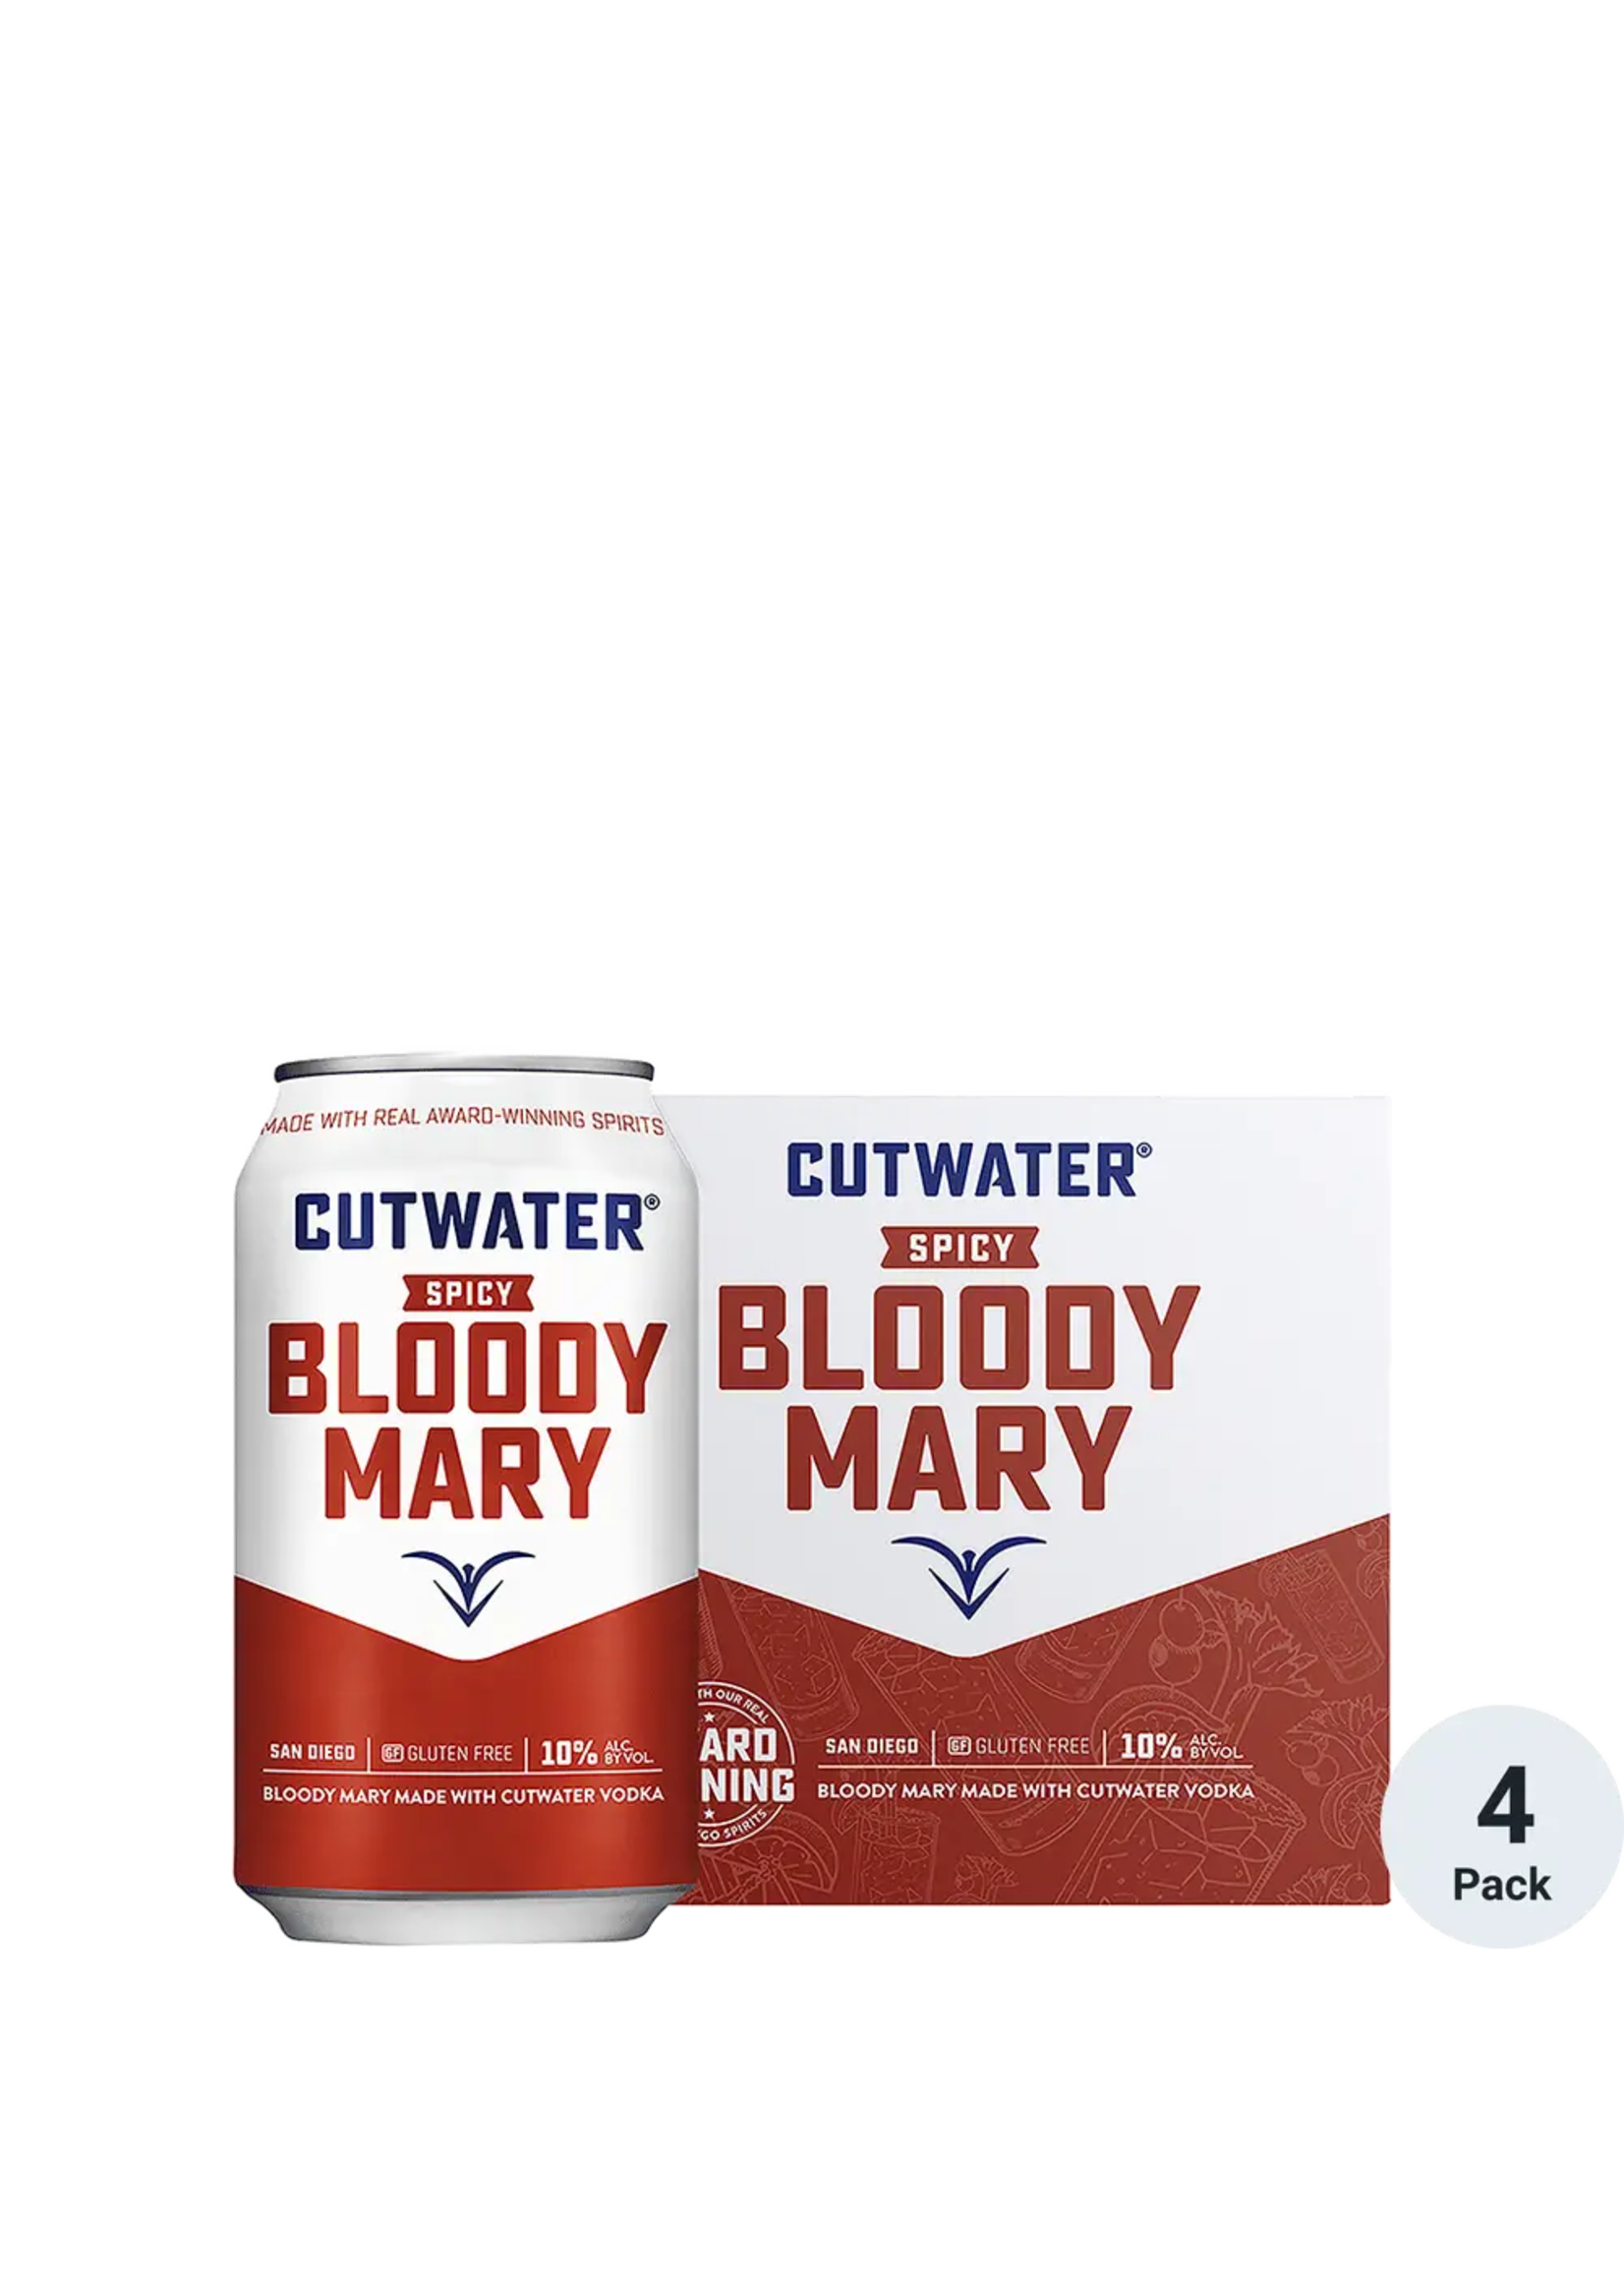 Cutwater Cutwater Cocktail Spicy Bloody Mary 20Proof 4pk 12oz Cans